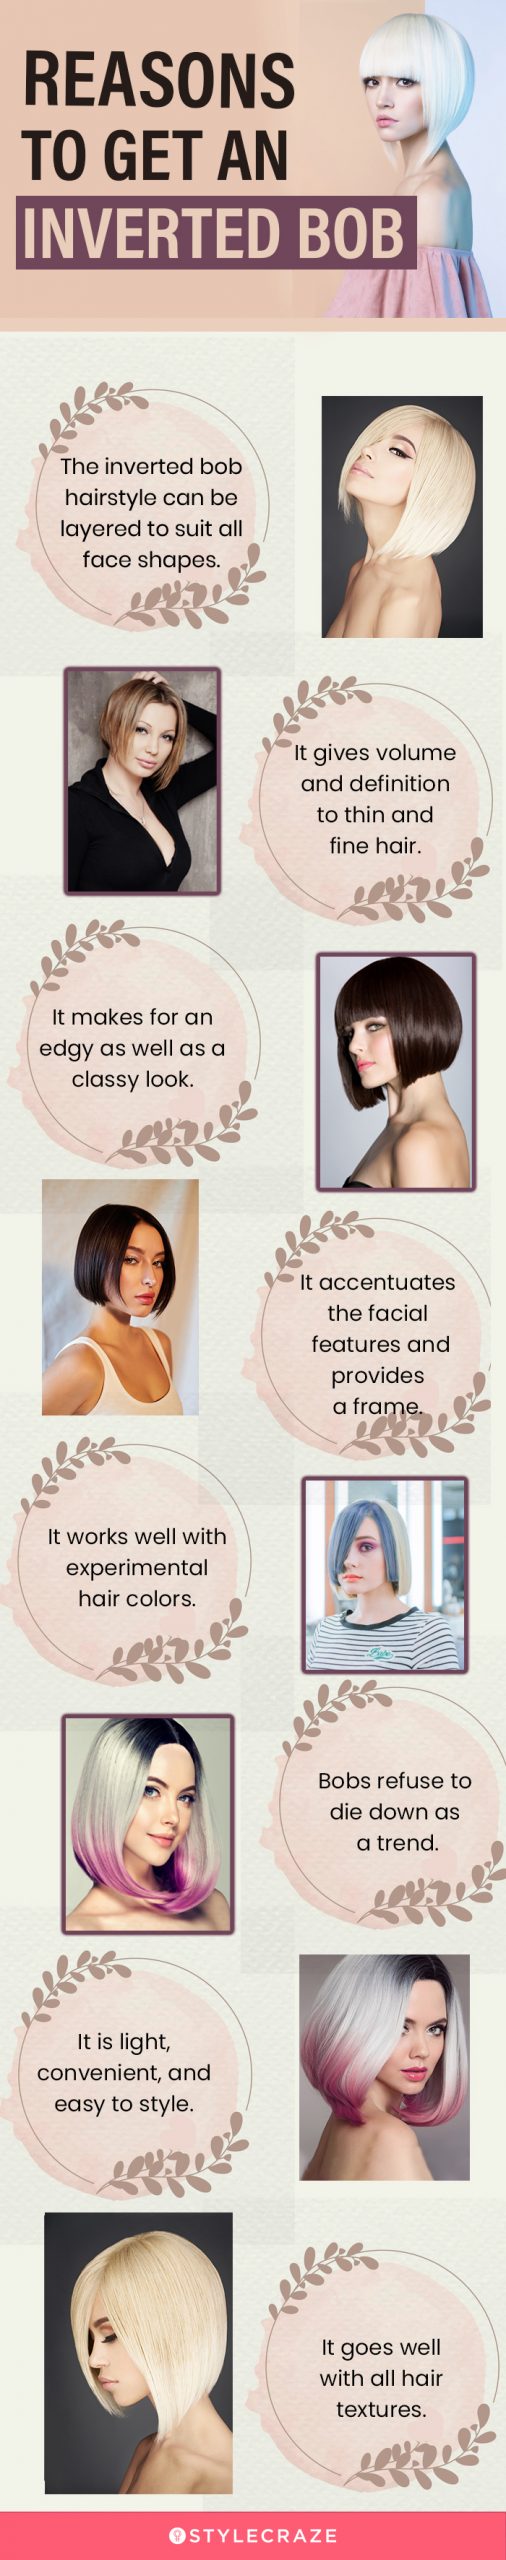 reasons to get an inverted bob [infographic]